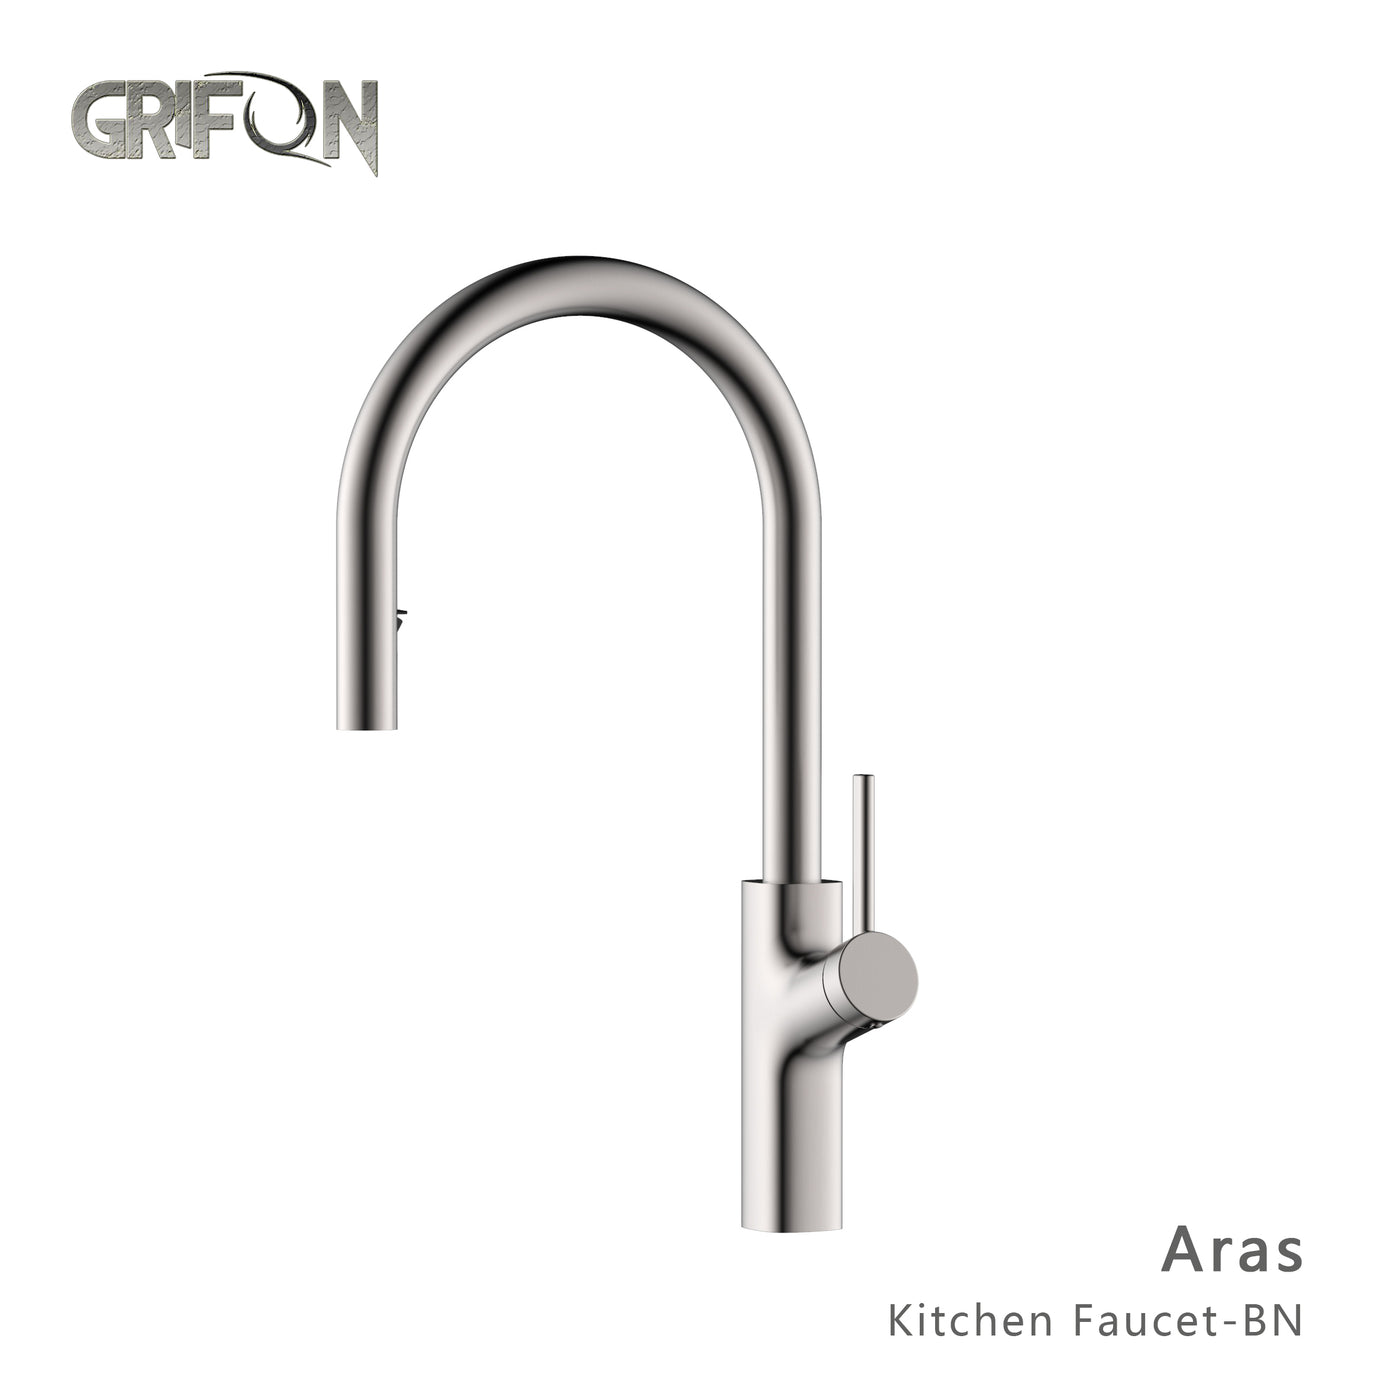 ARAS™ GF404 Contemporary Style Single-Handle Kitchen Sink Faucet with Pull-Down Sprayer